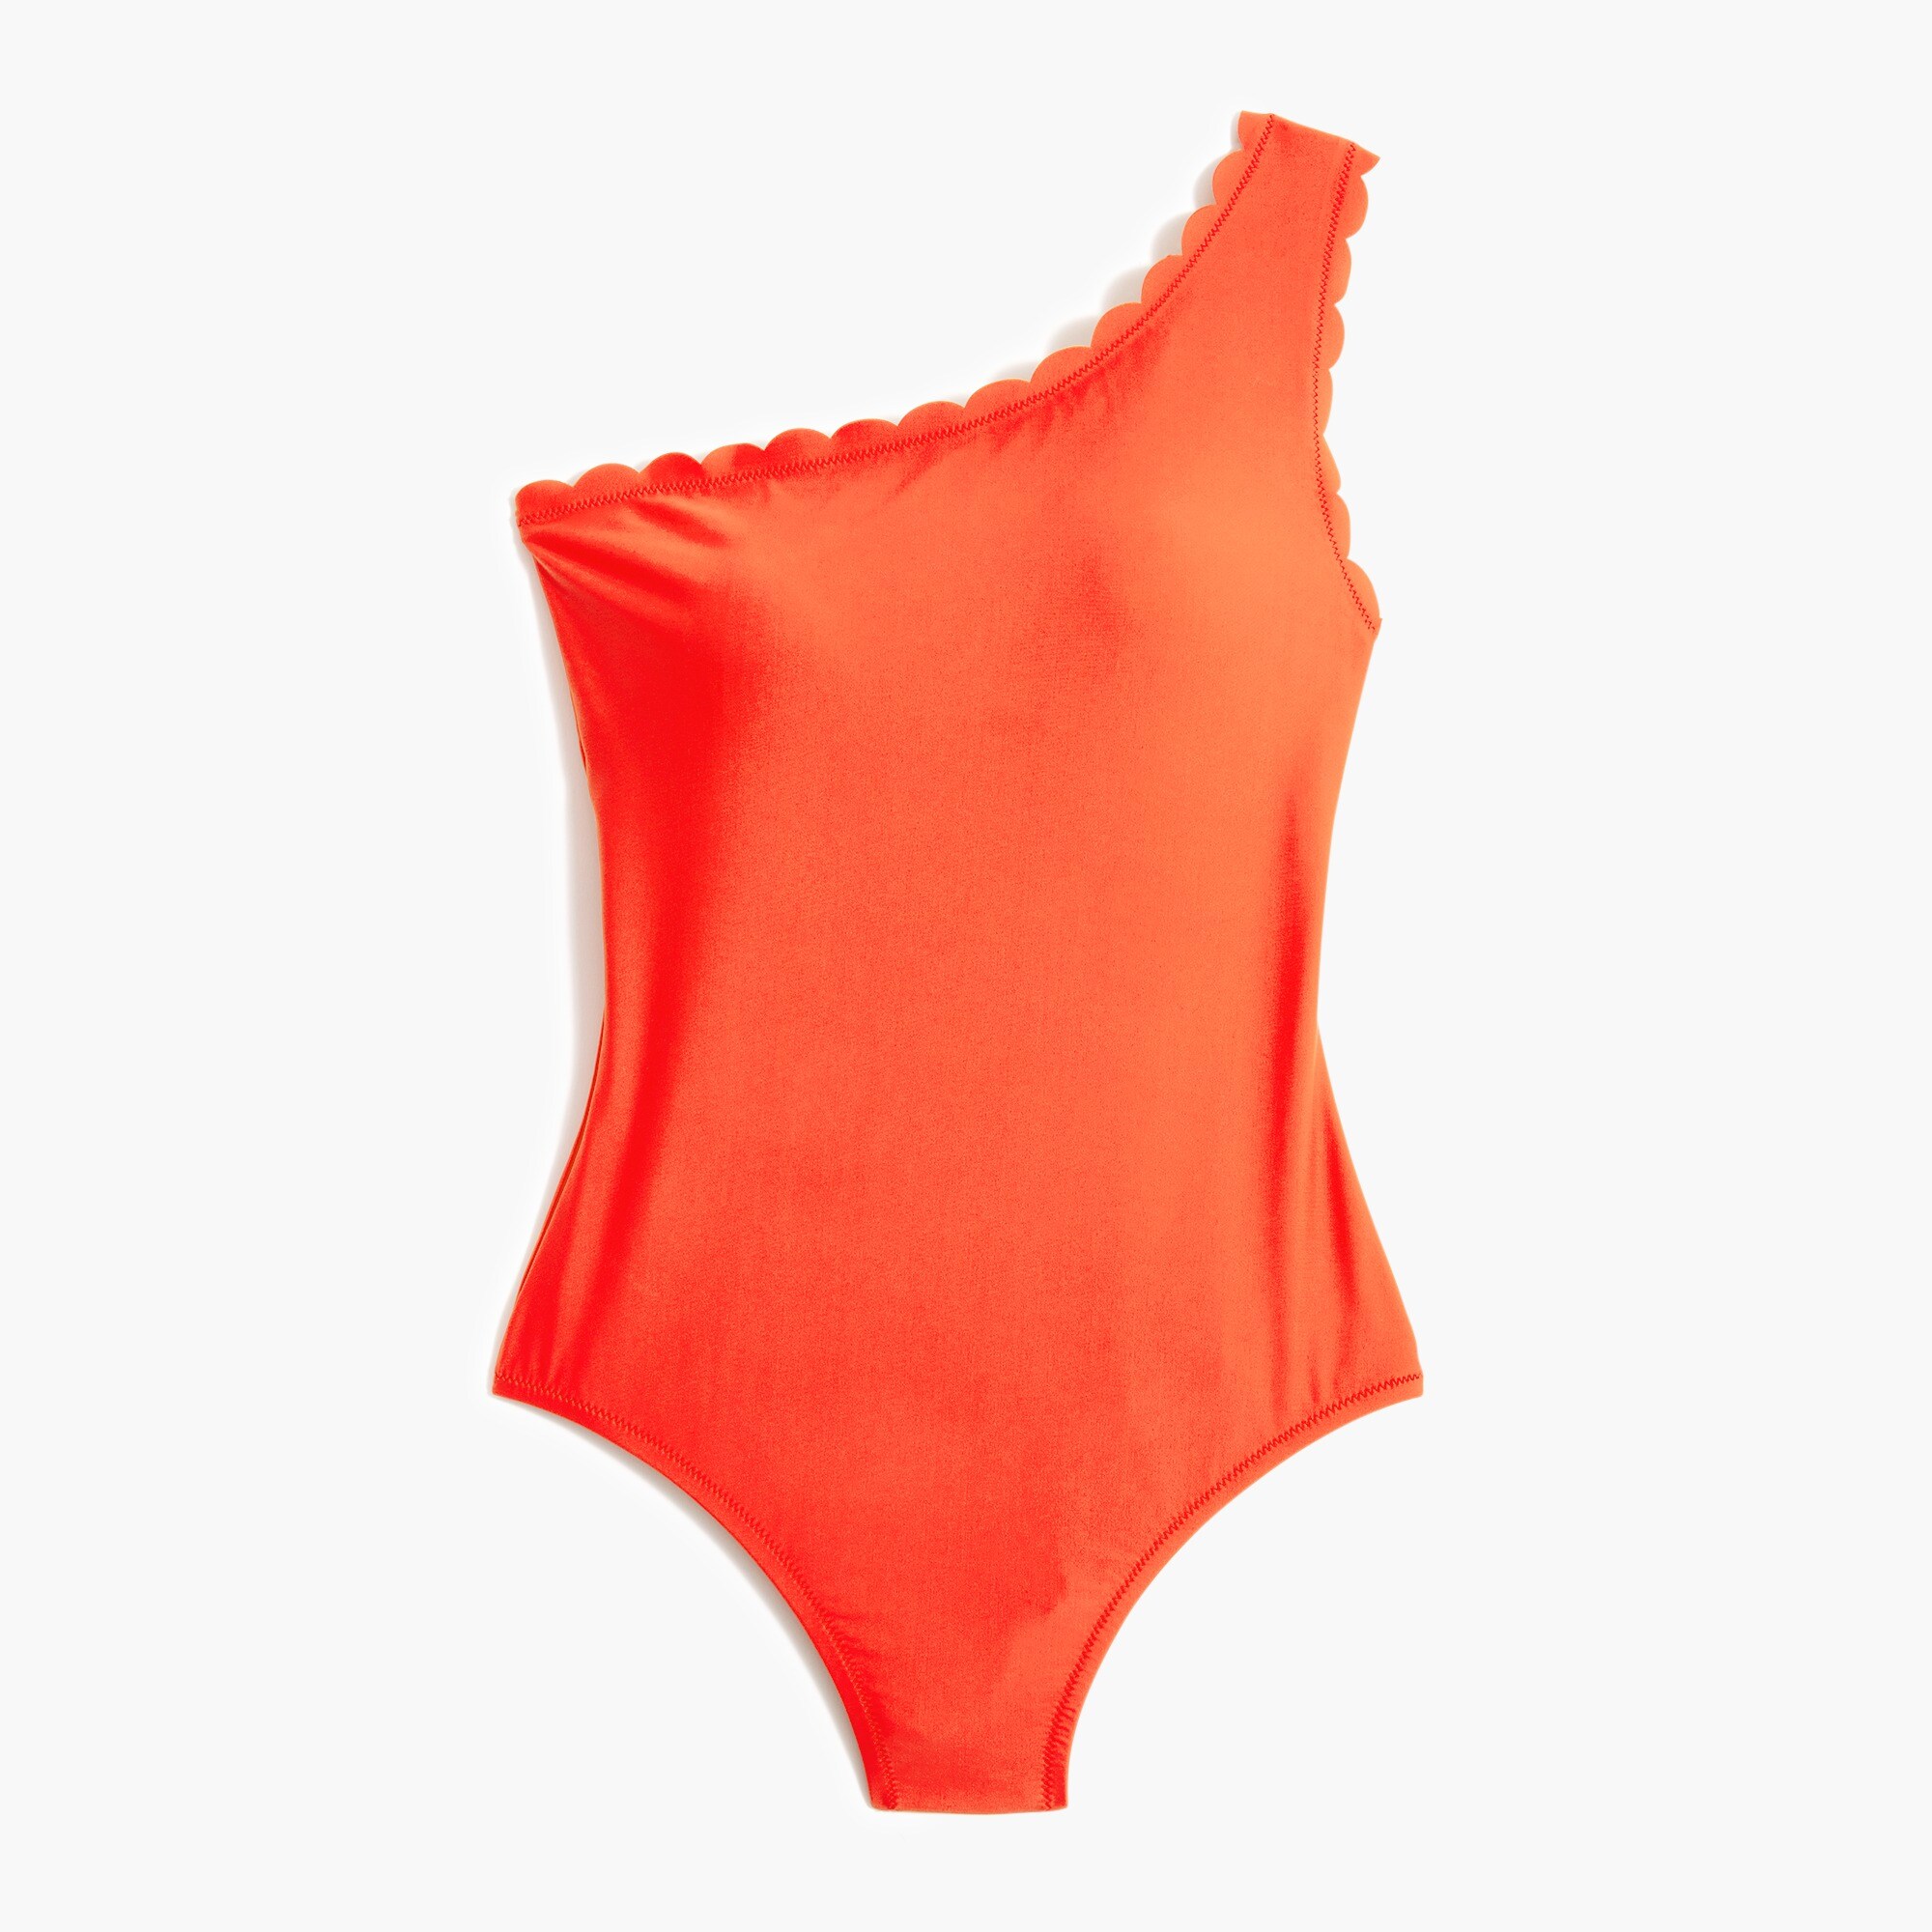  Scalloped one-shoulder one-piece swimsuit